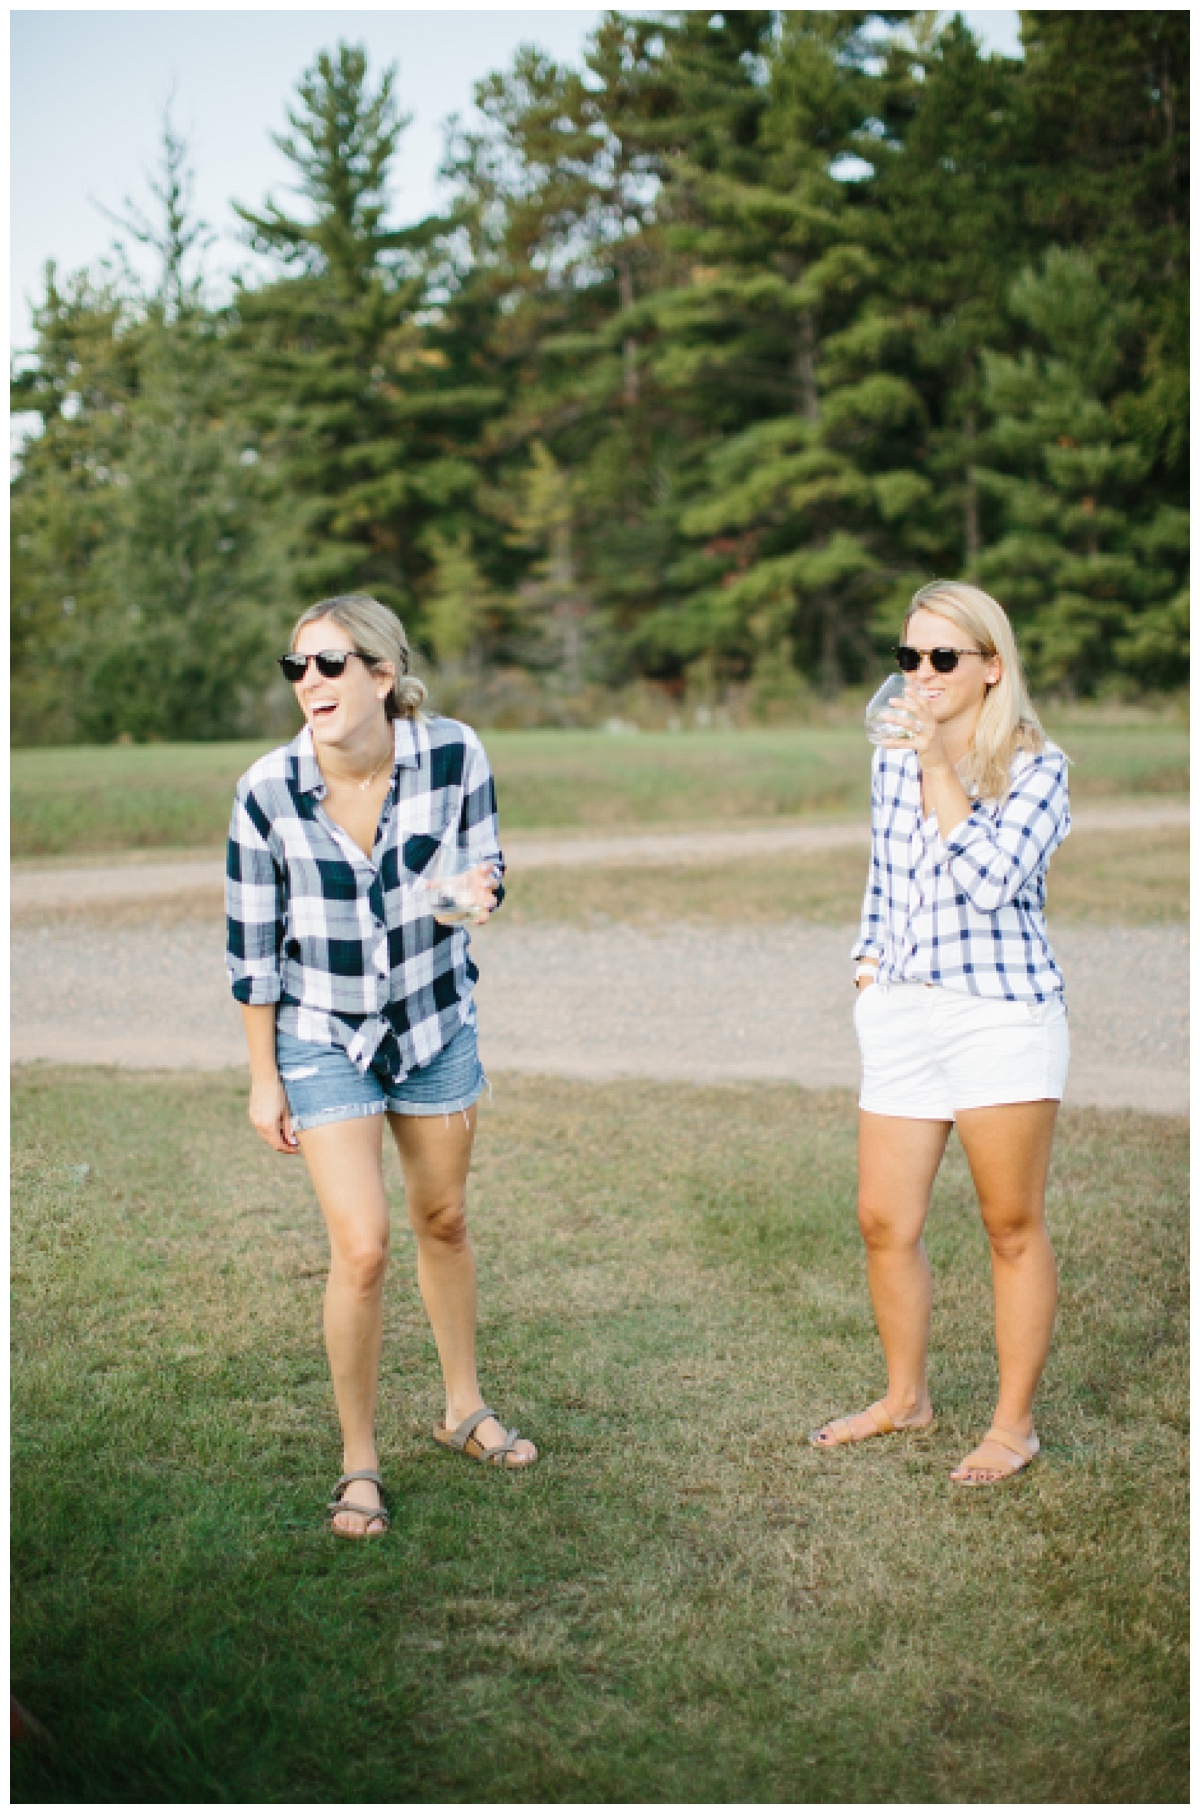 Alysa Rene Photography, Adventure North Retreat, Manitowish Waters, Alderwood Resort, The Lake Effect Co, Northerly Collective, Northern Wisconsin, Northwoods, Women, cranberry bog, wine tasting, cheese